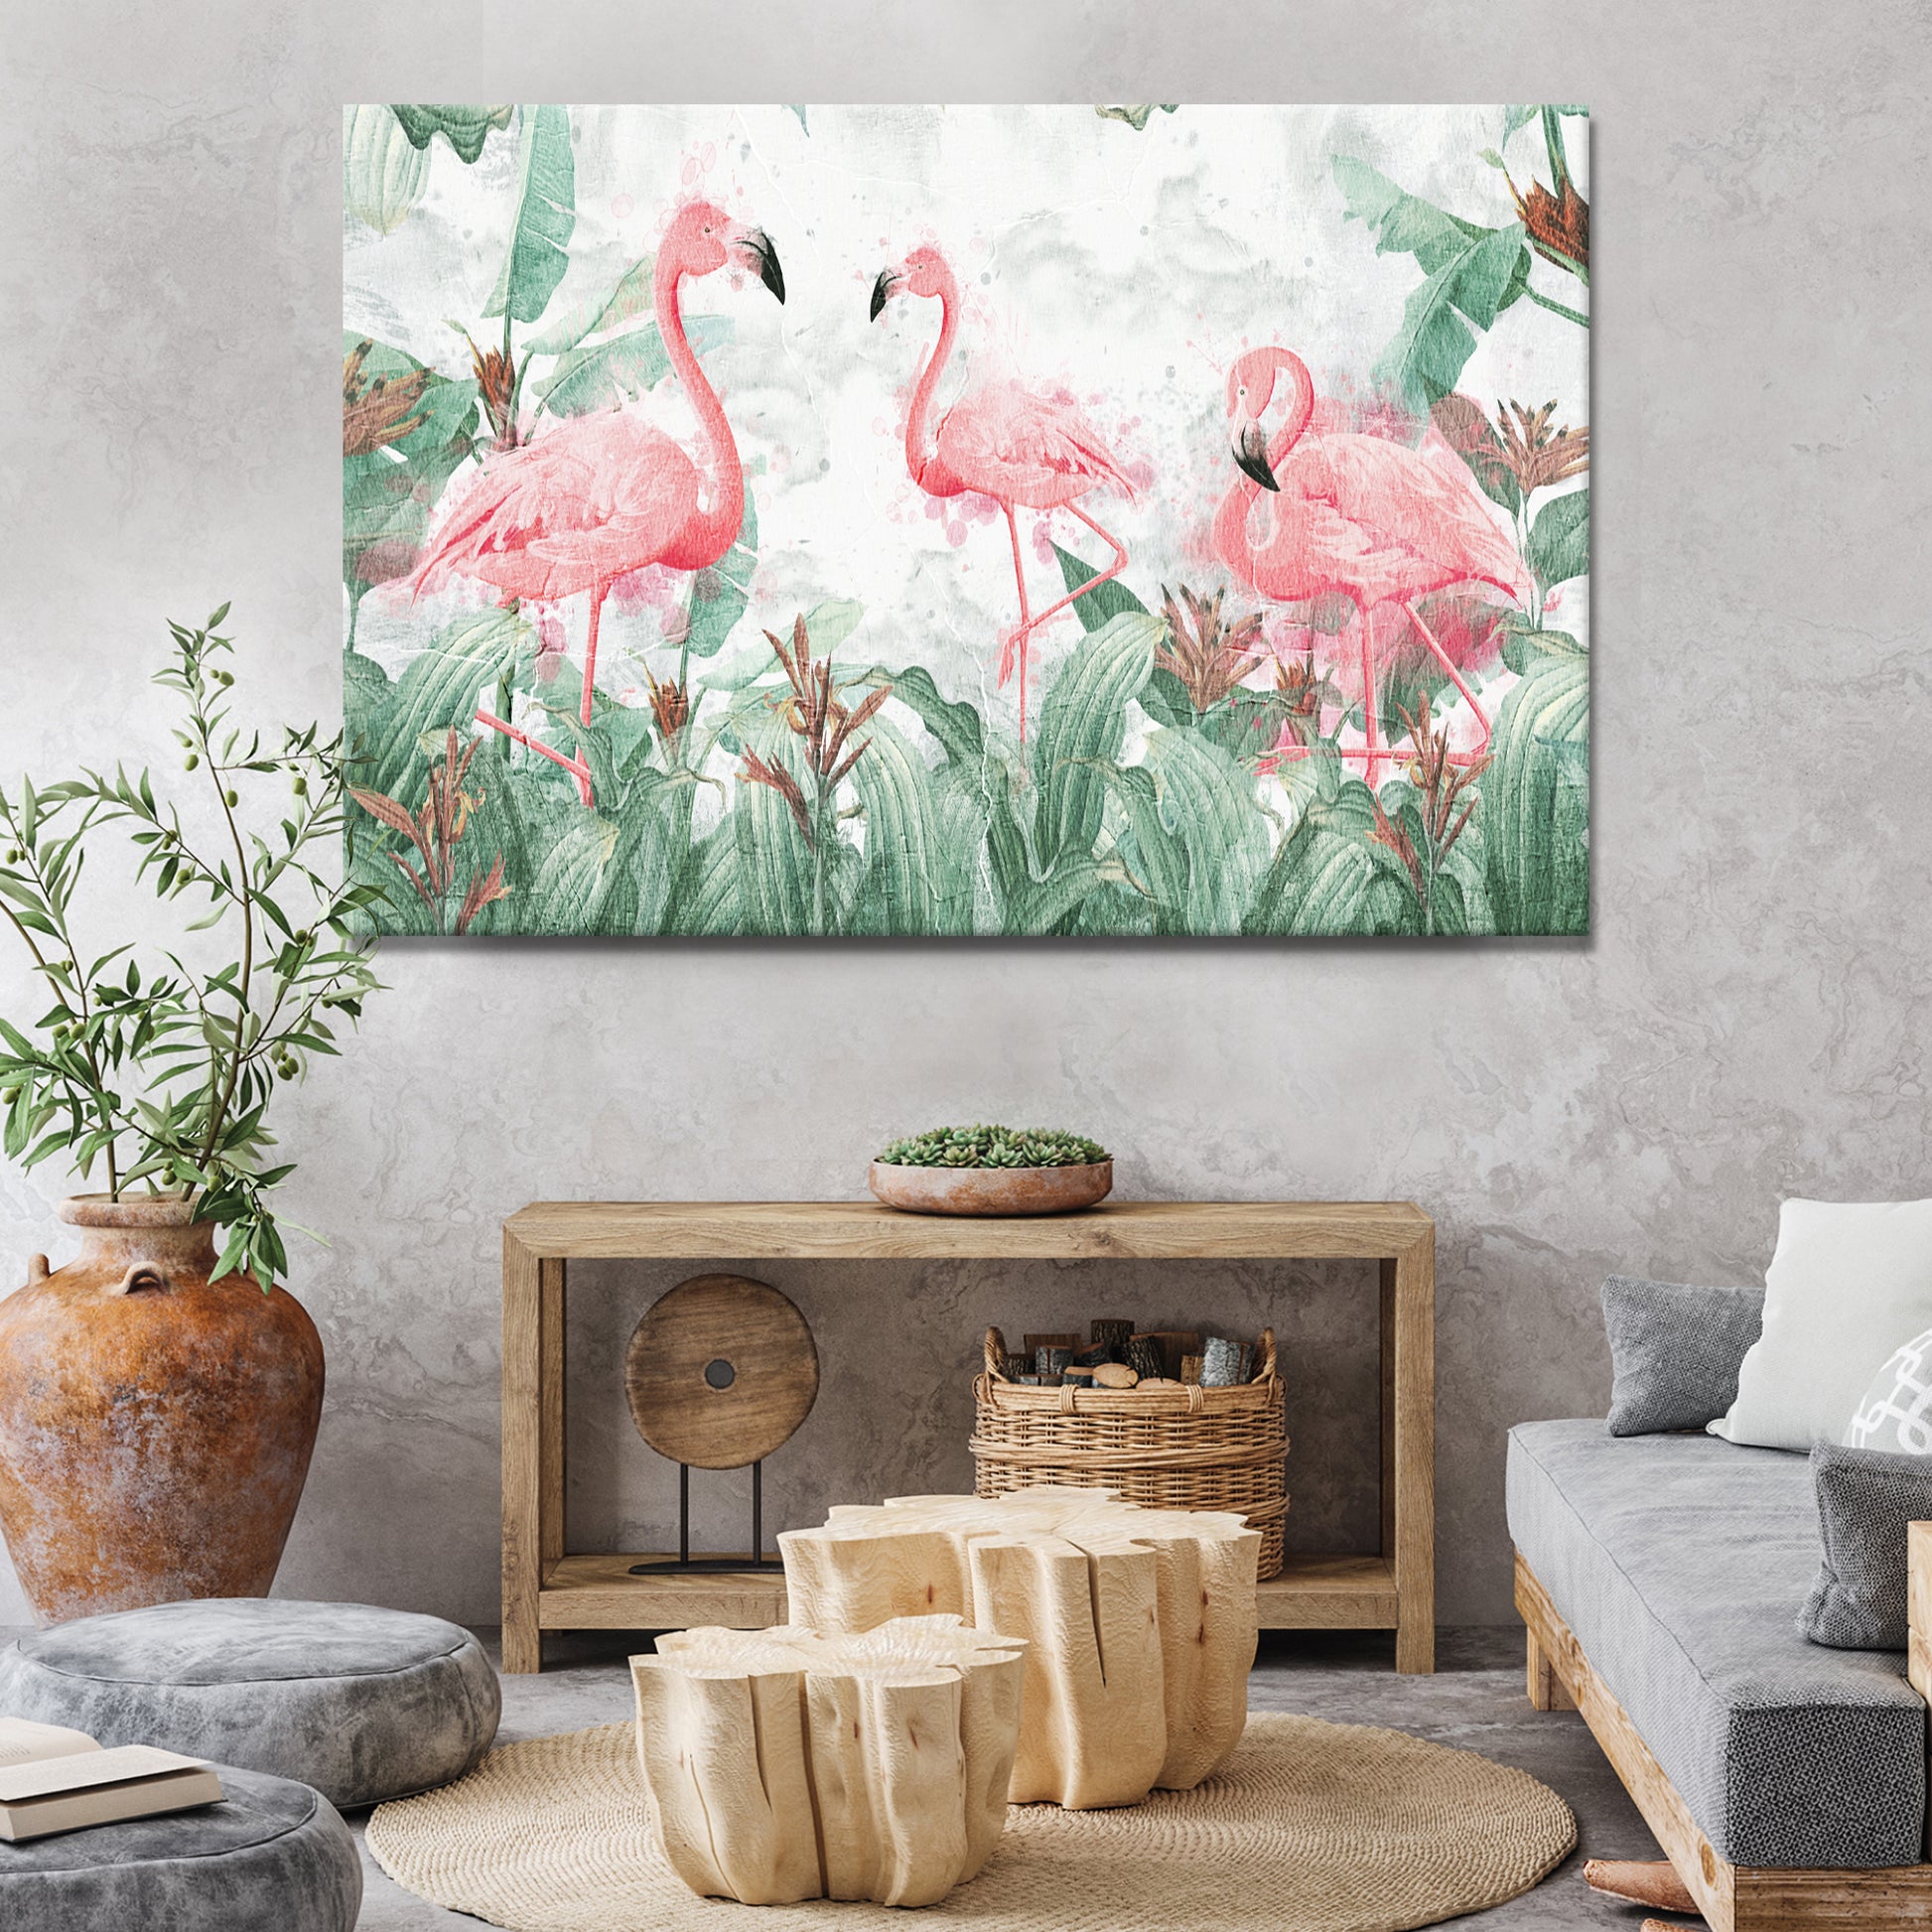 Forest Flamingo Painting Canvas Wall Art - Image by Tailored Canvases